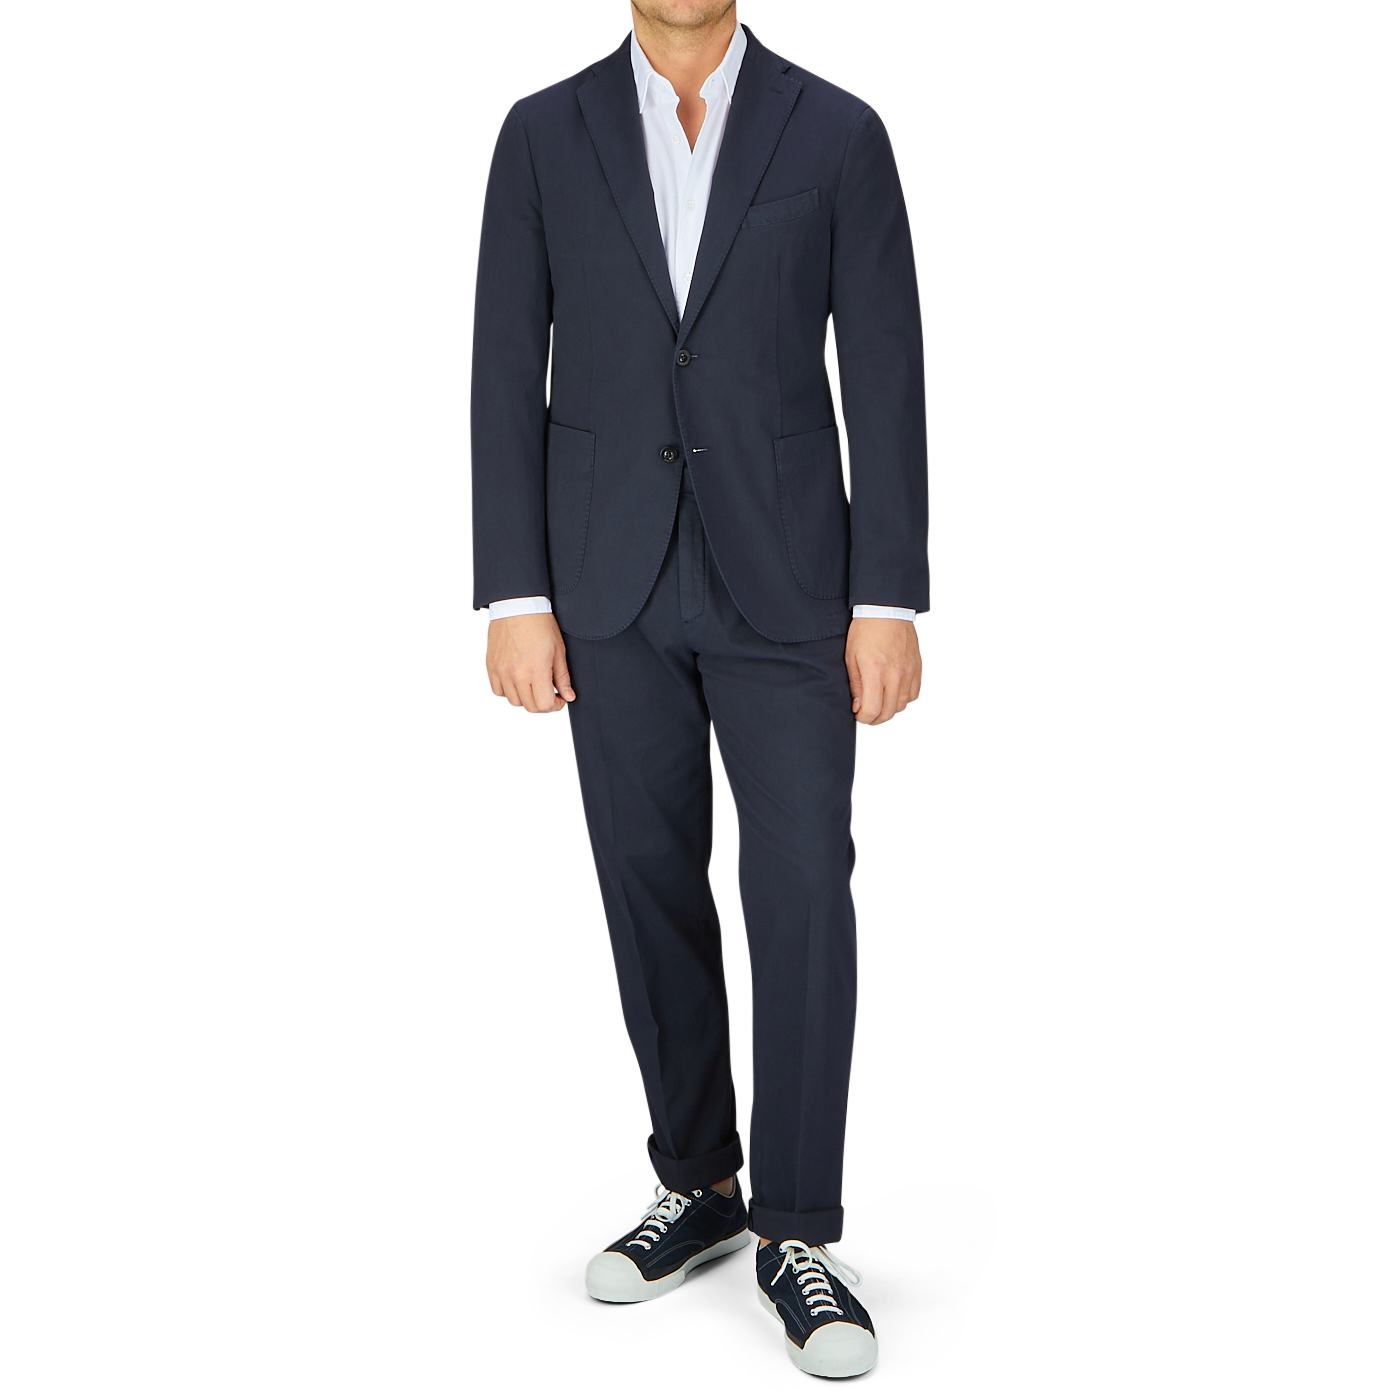 Man in a navy blue Boglioli Navy Blue Washed Cotton K Jacket crafted with unstructured craftsmanship from Italy, paired with a white shirt and casual sneakers standing against a white background.